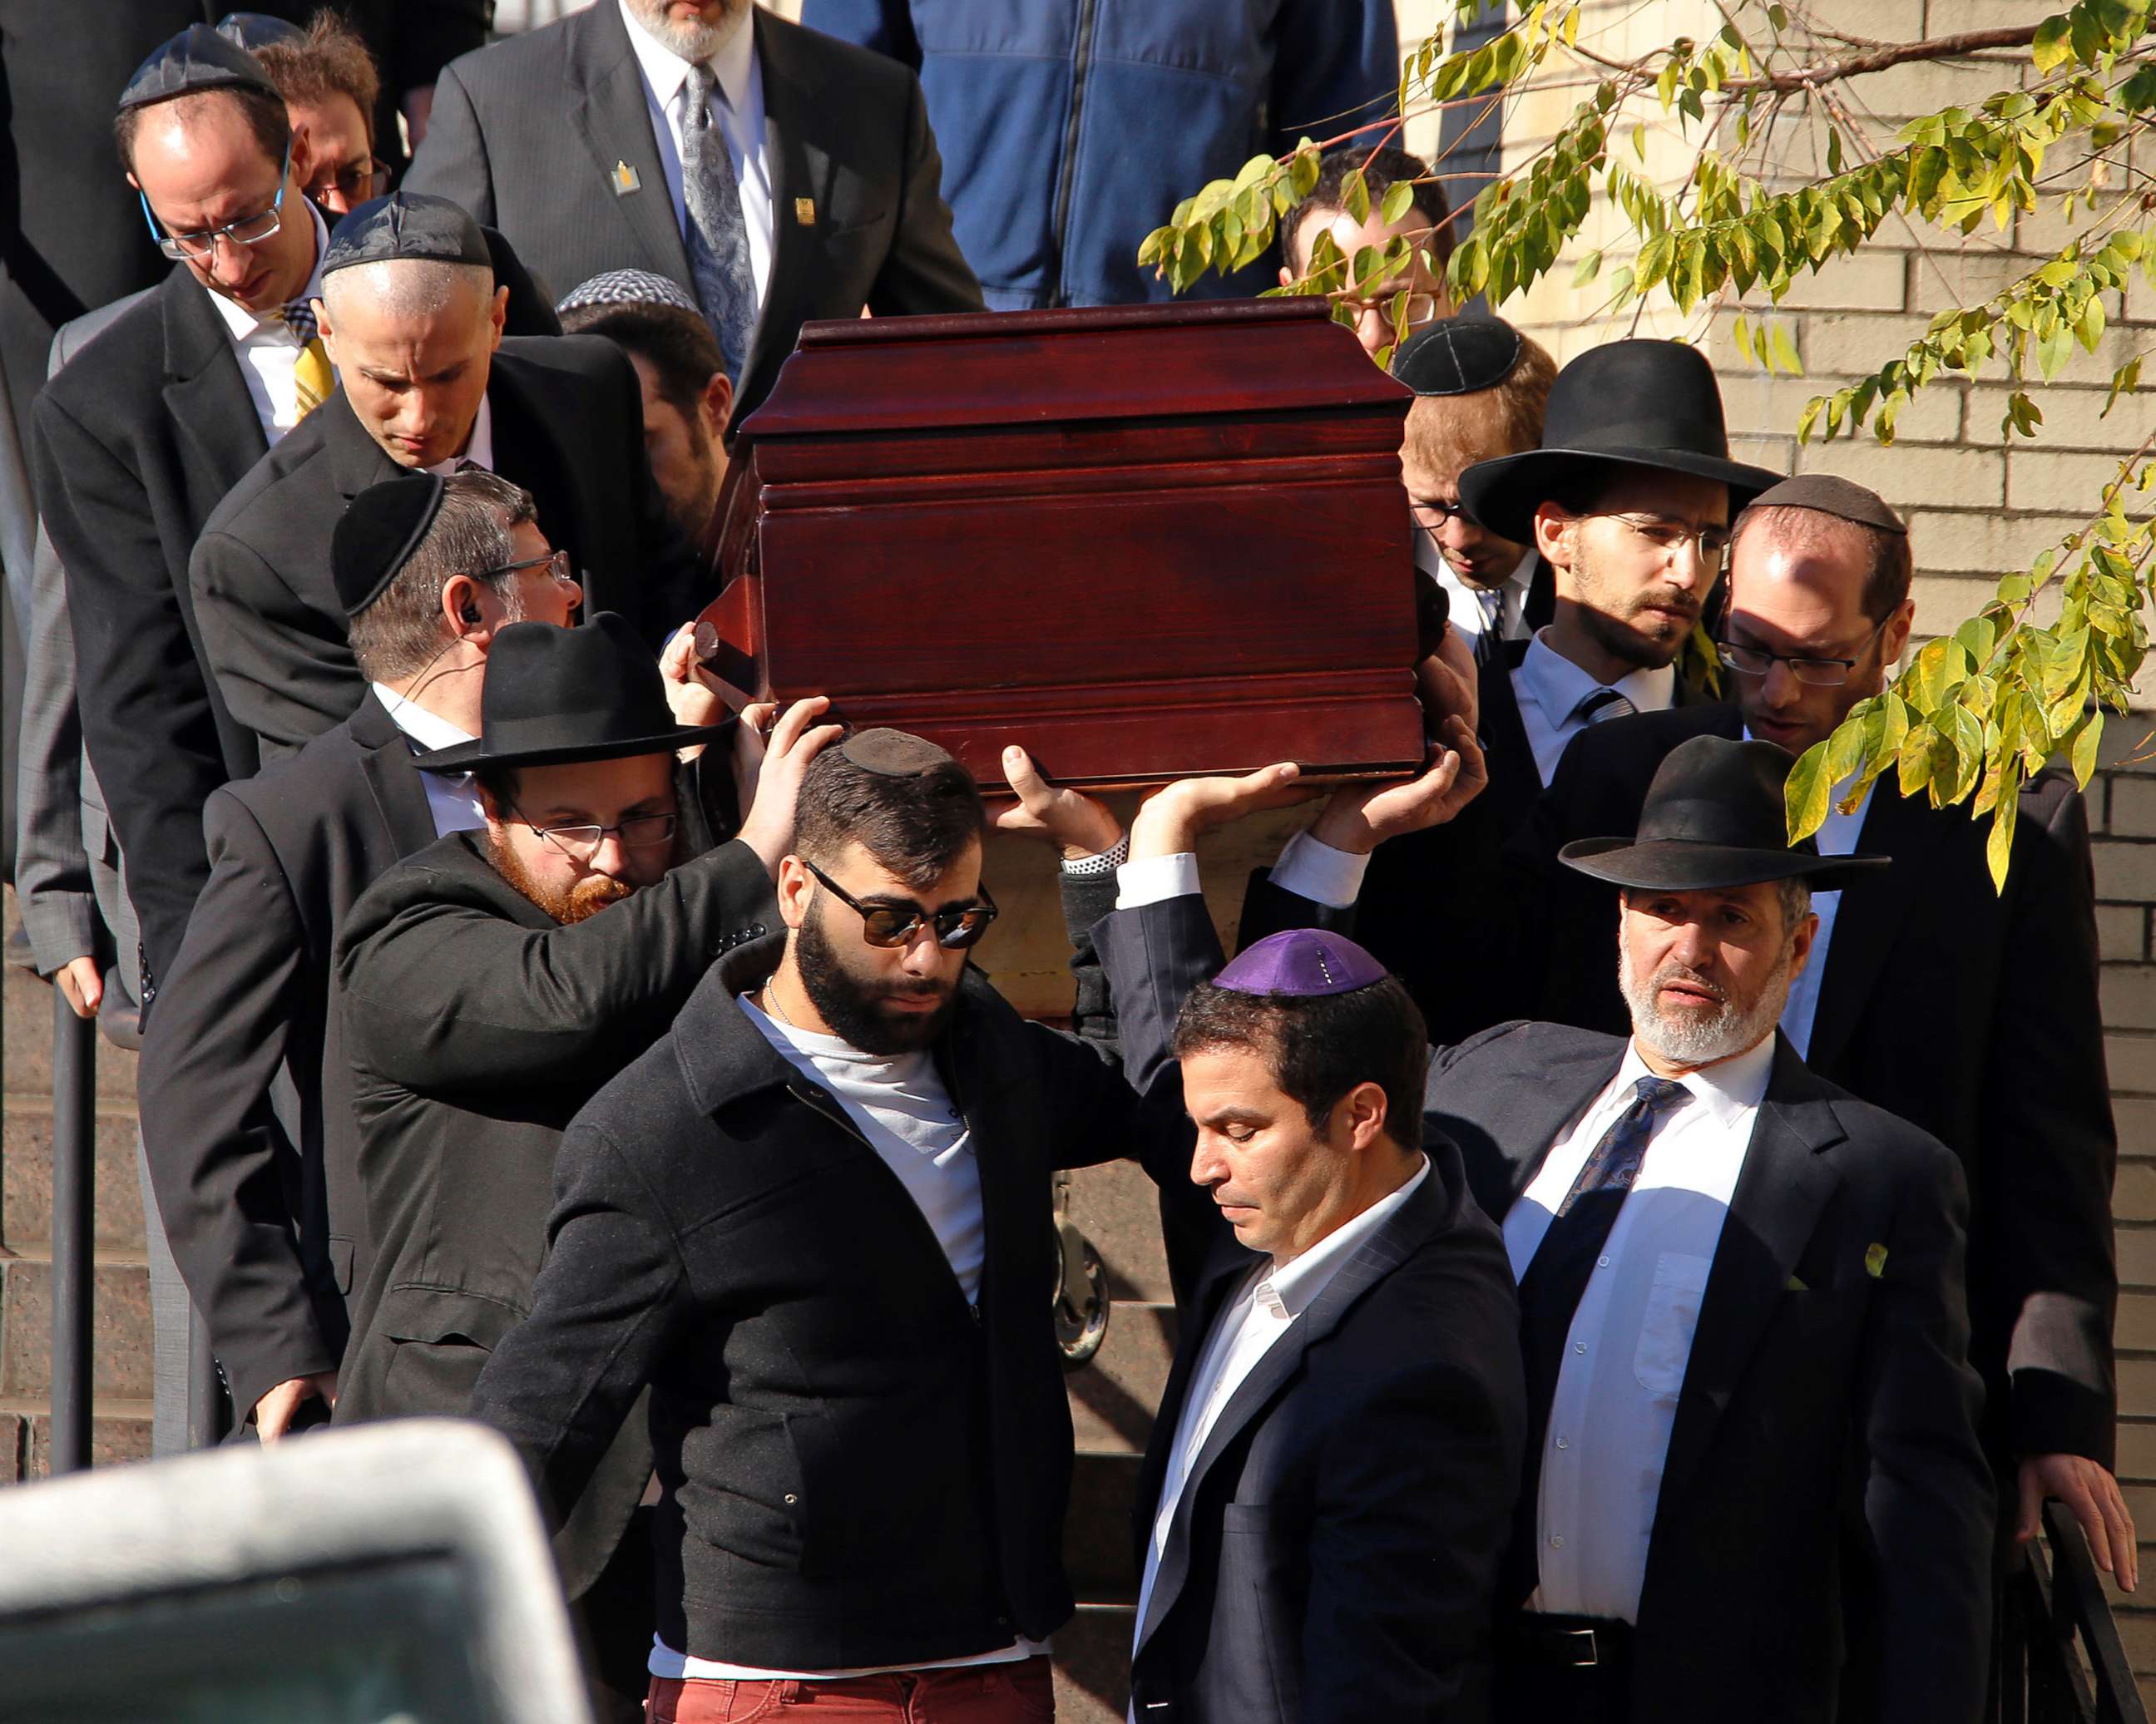 PHOTO: Pallbearers carry the casket of Joyce Fienberg from the Beth Shalom Synagogue following a funeral service in Pittsburgh, Oct. 31, 2018.